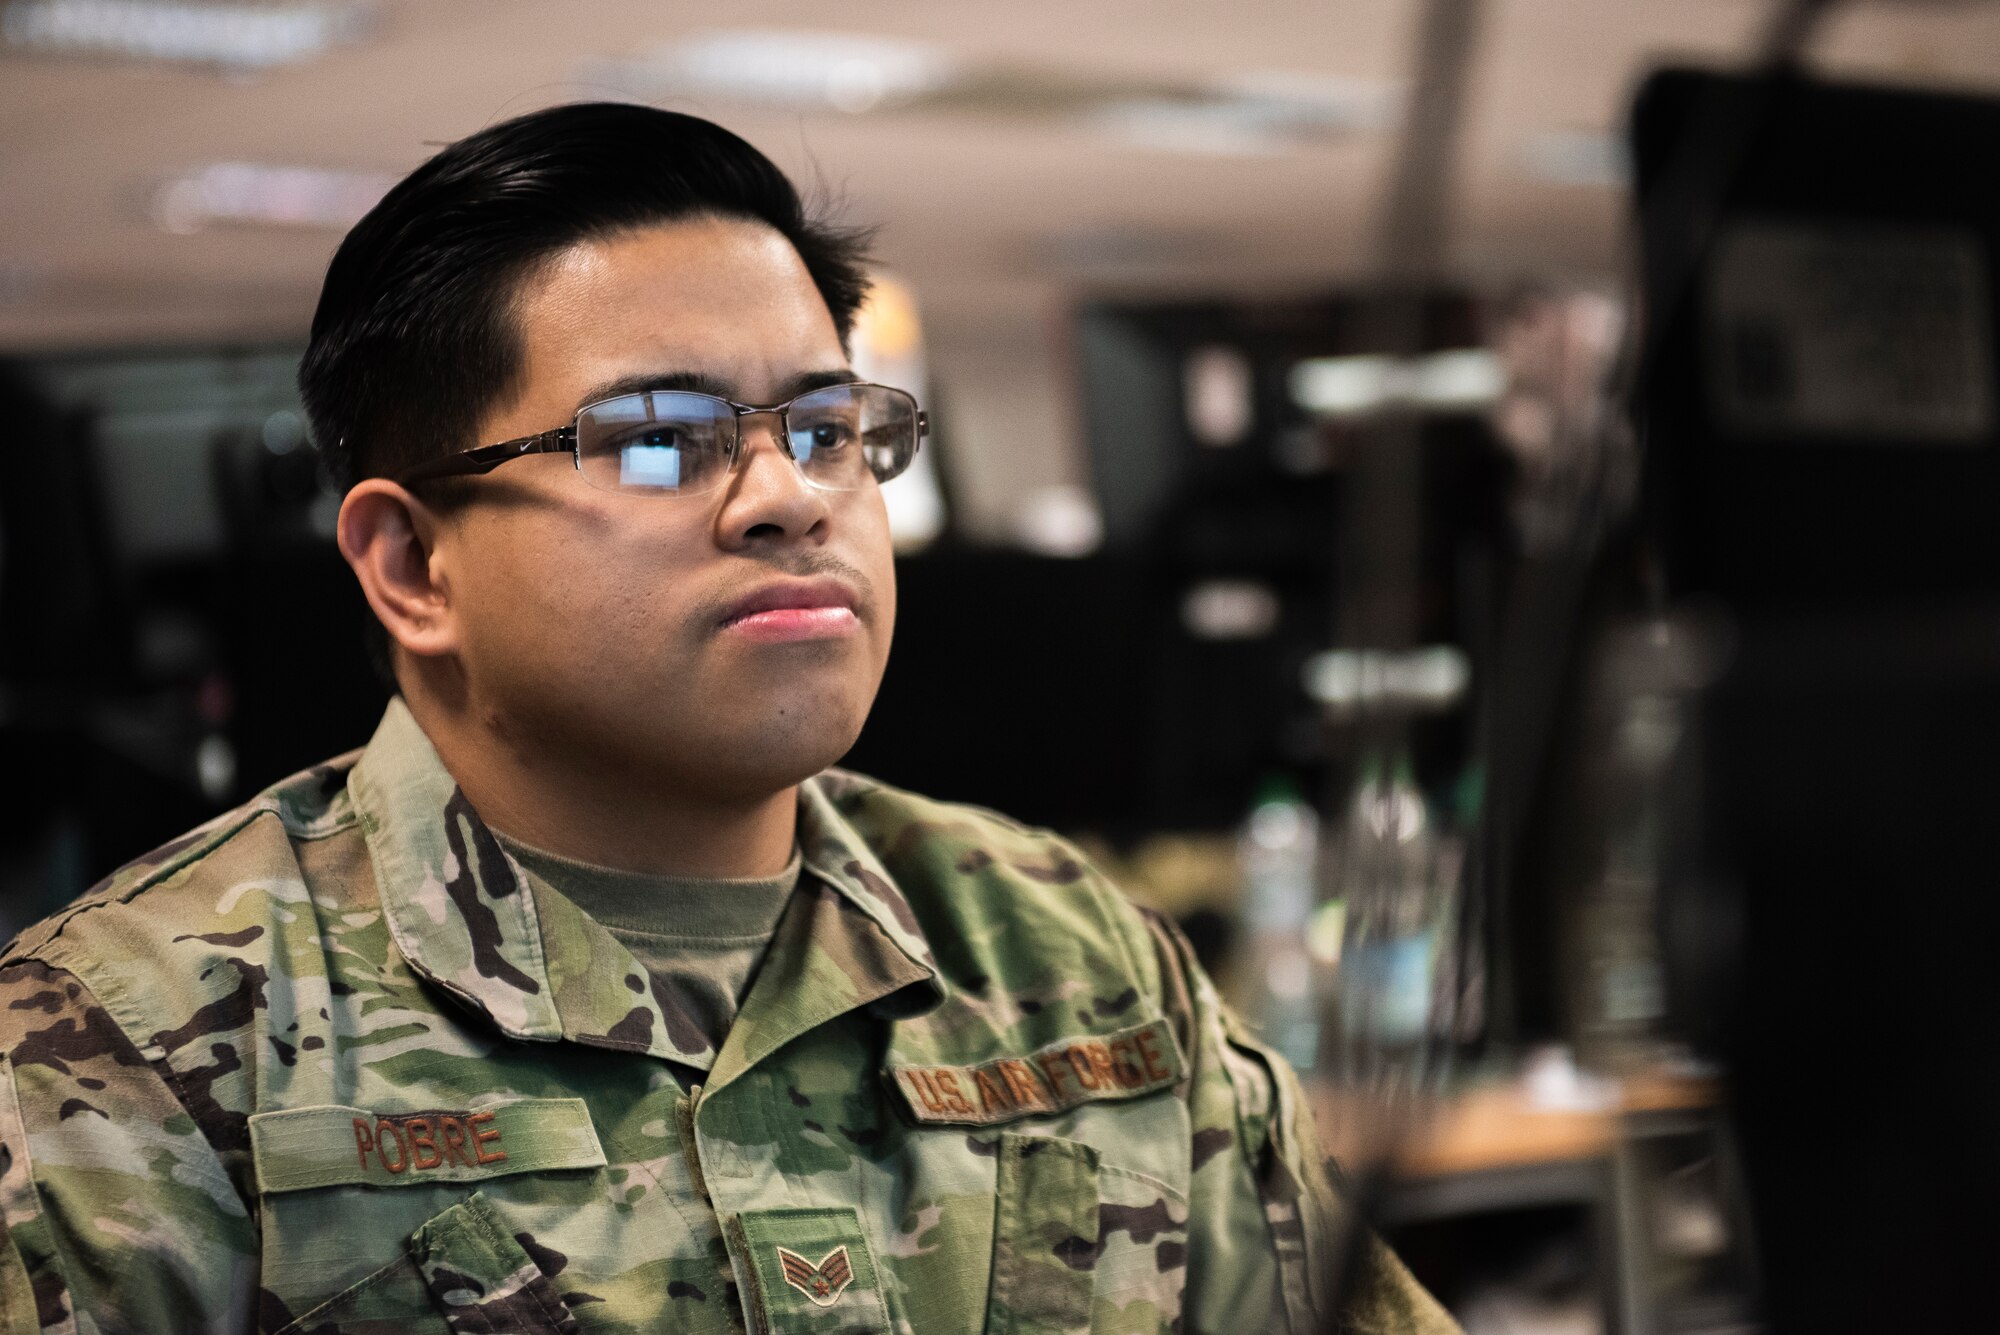 A U.S. Airman looks at his computer screen and is reflected off of his eye-glasses.